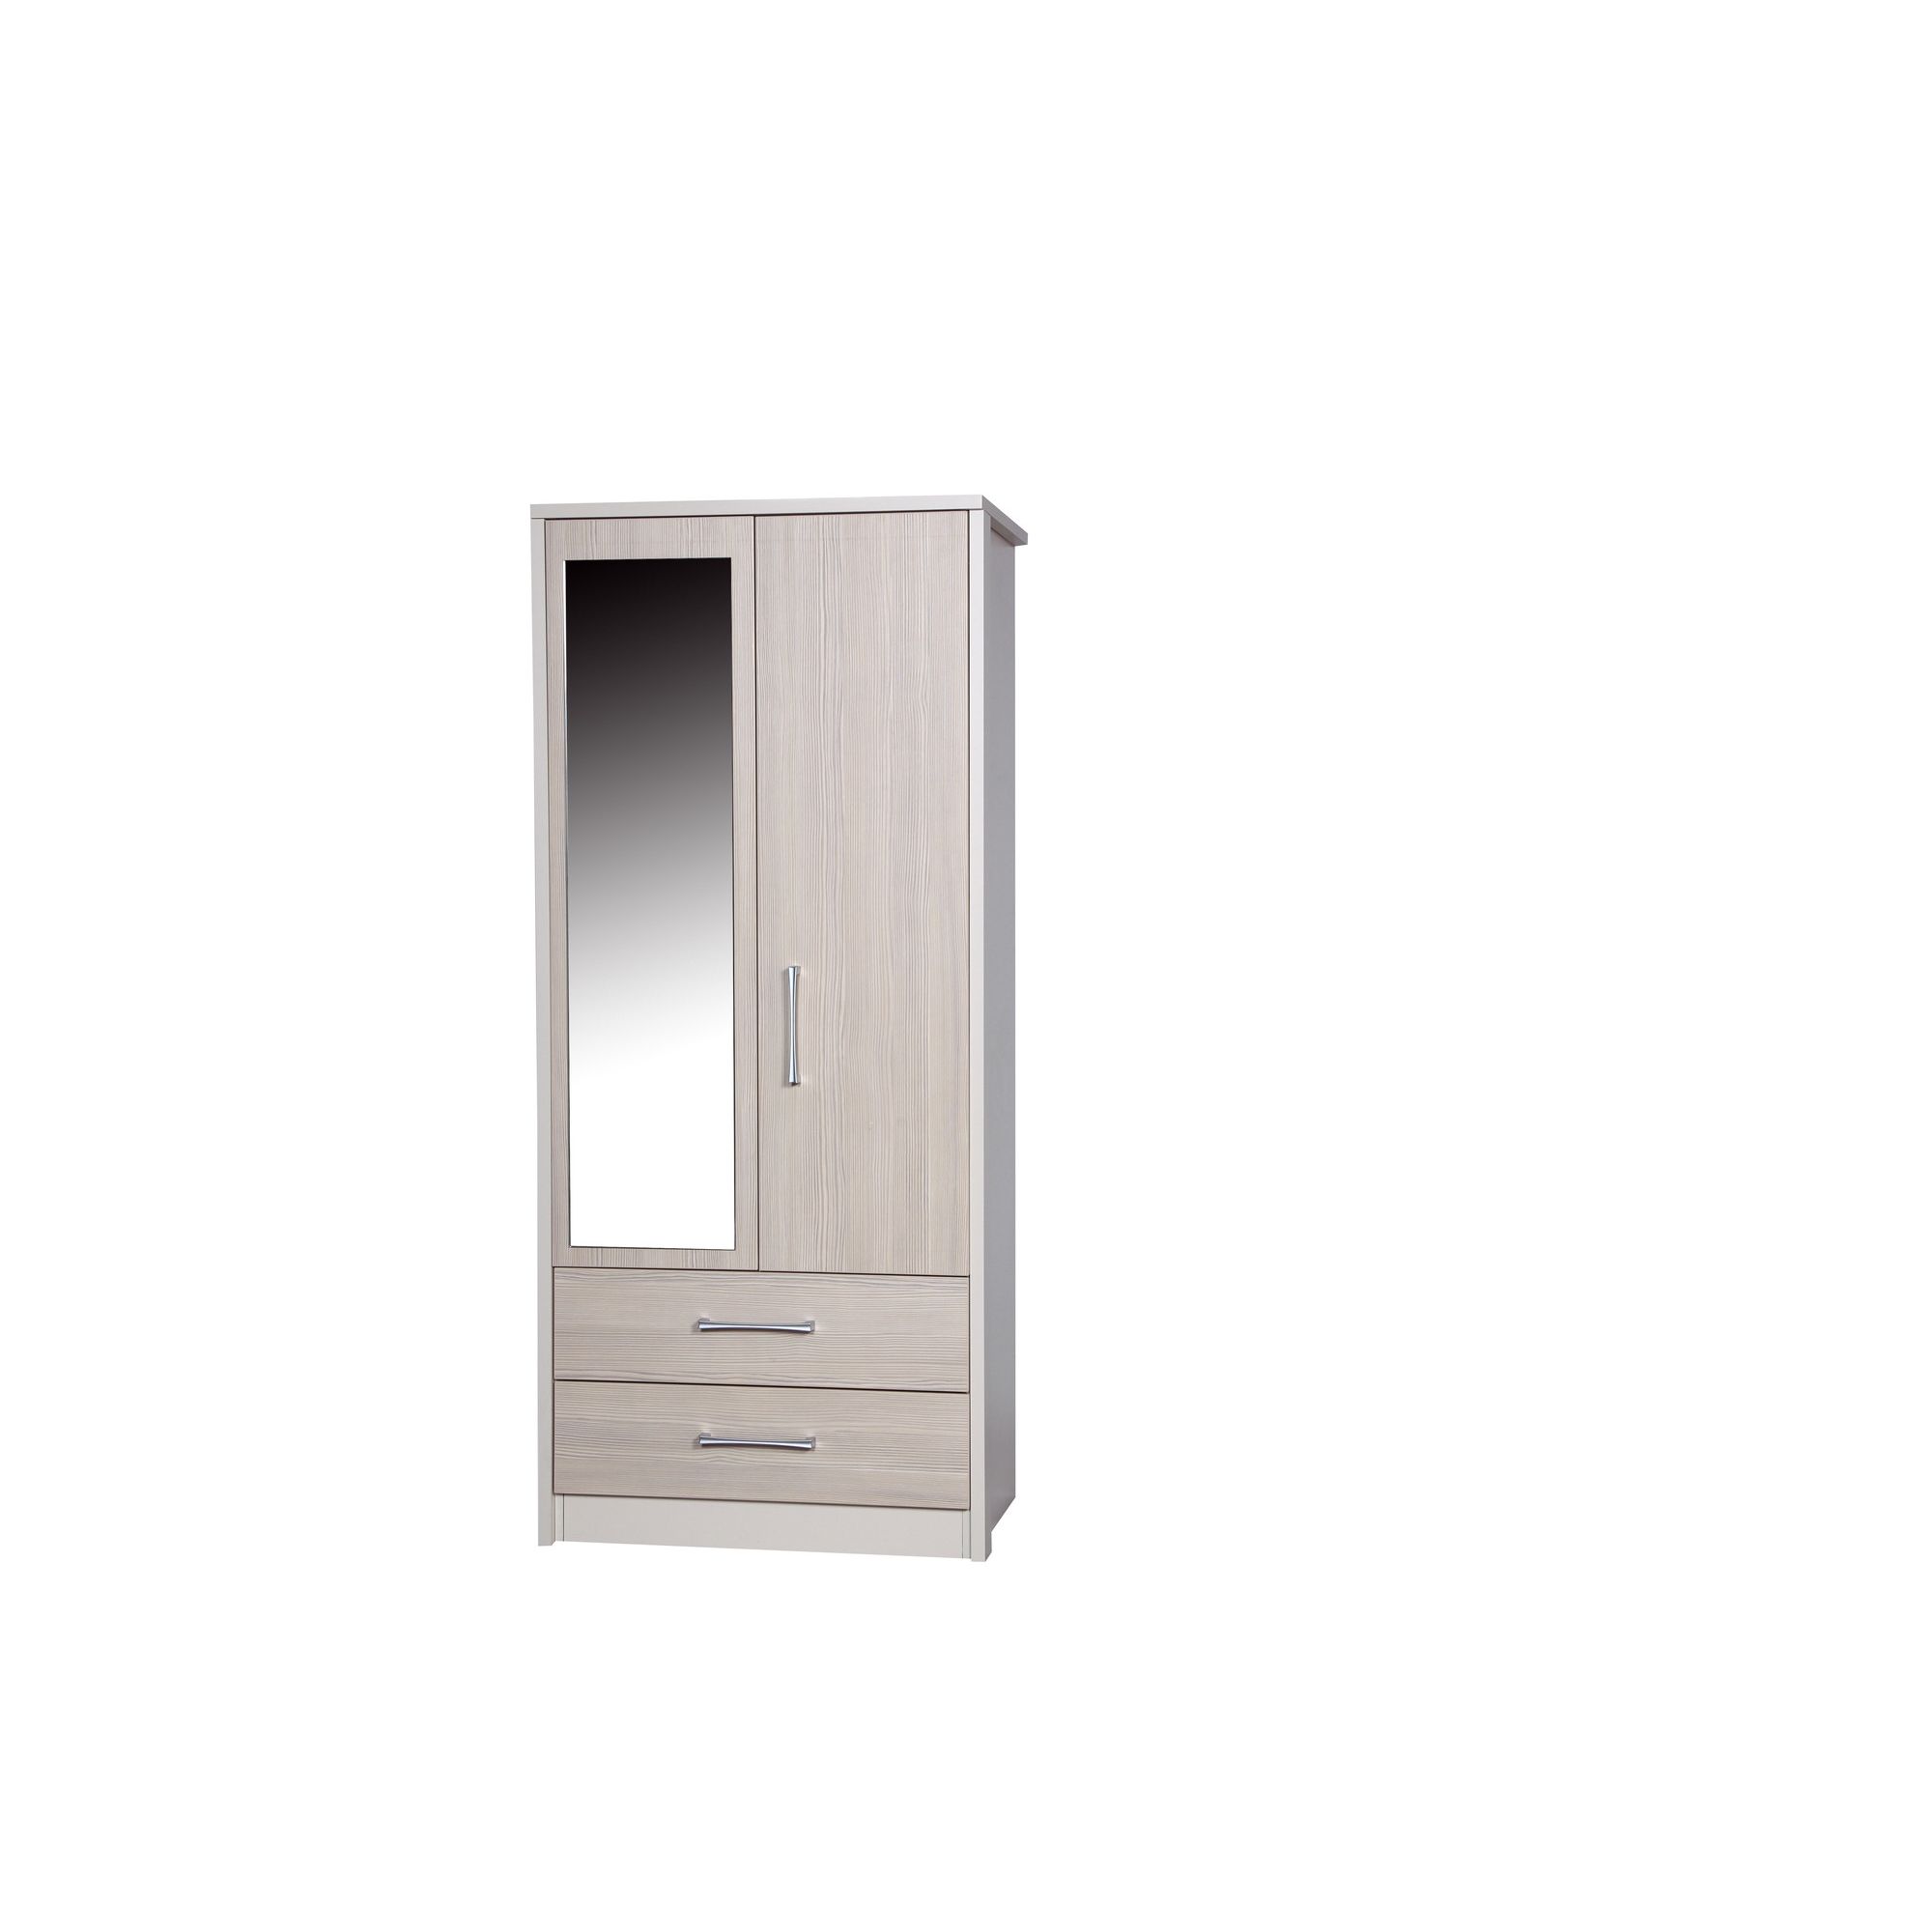 Alto Furniture Avola 2 Drawer Combi Wardrobe with Mirror - Cream Carcass With Champagne Avola at Tescos Direct